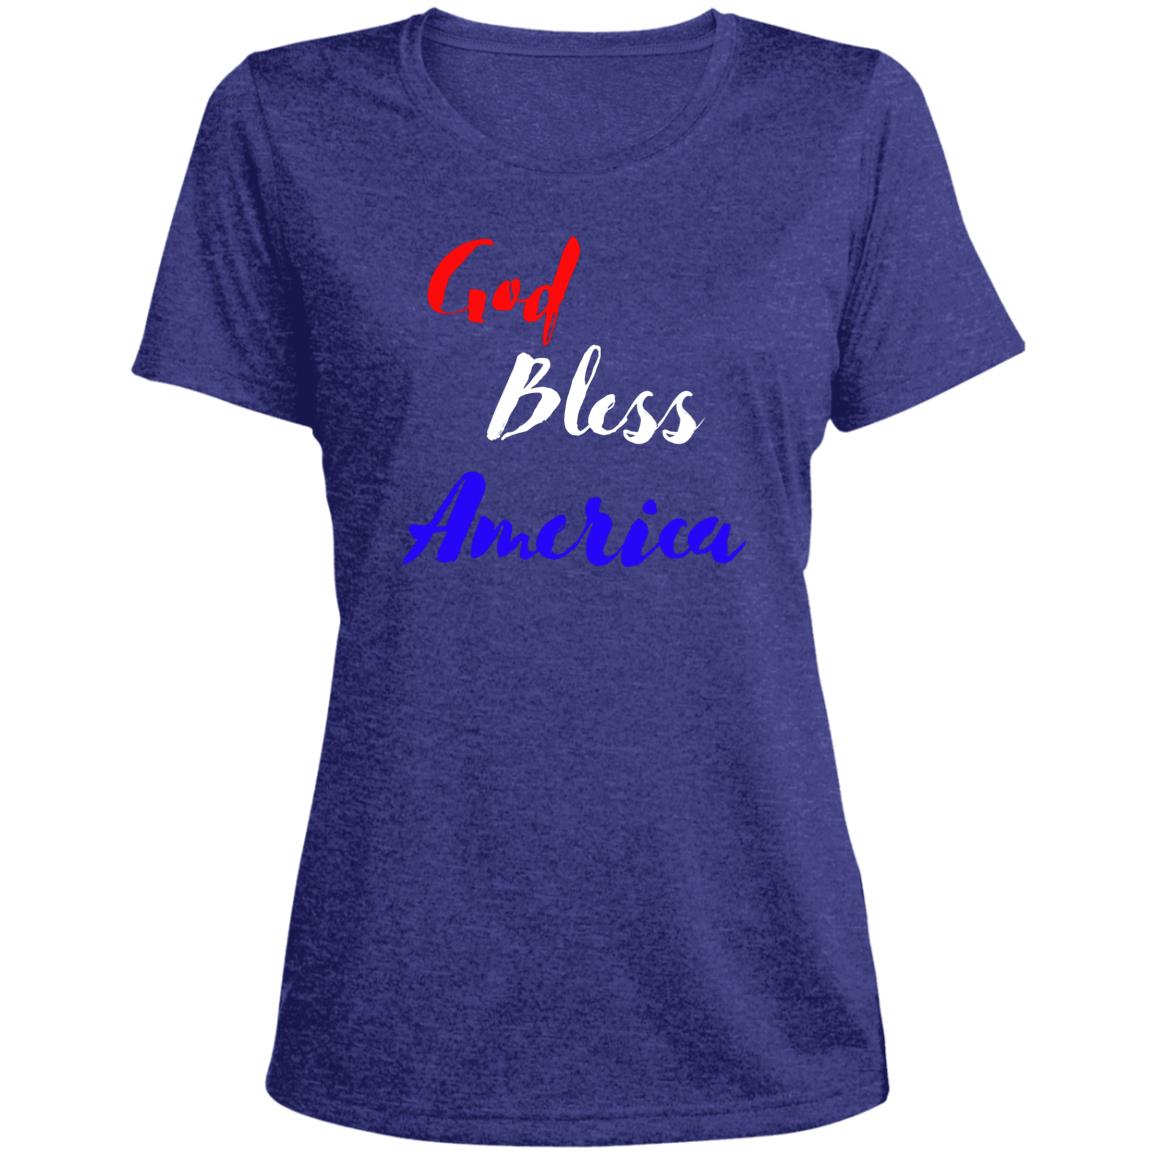 God bless America red white blue LST360 Ladies' Heather Scoop Neck Performance Tee